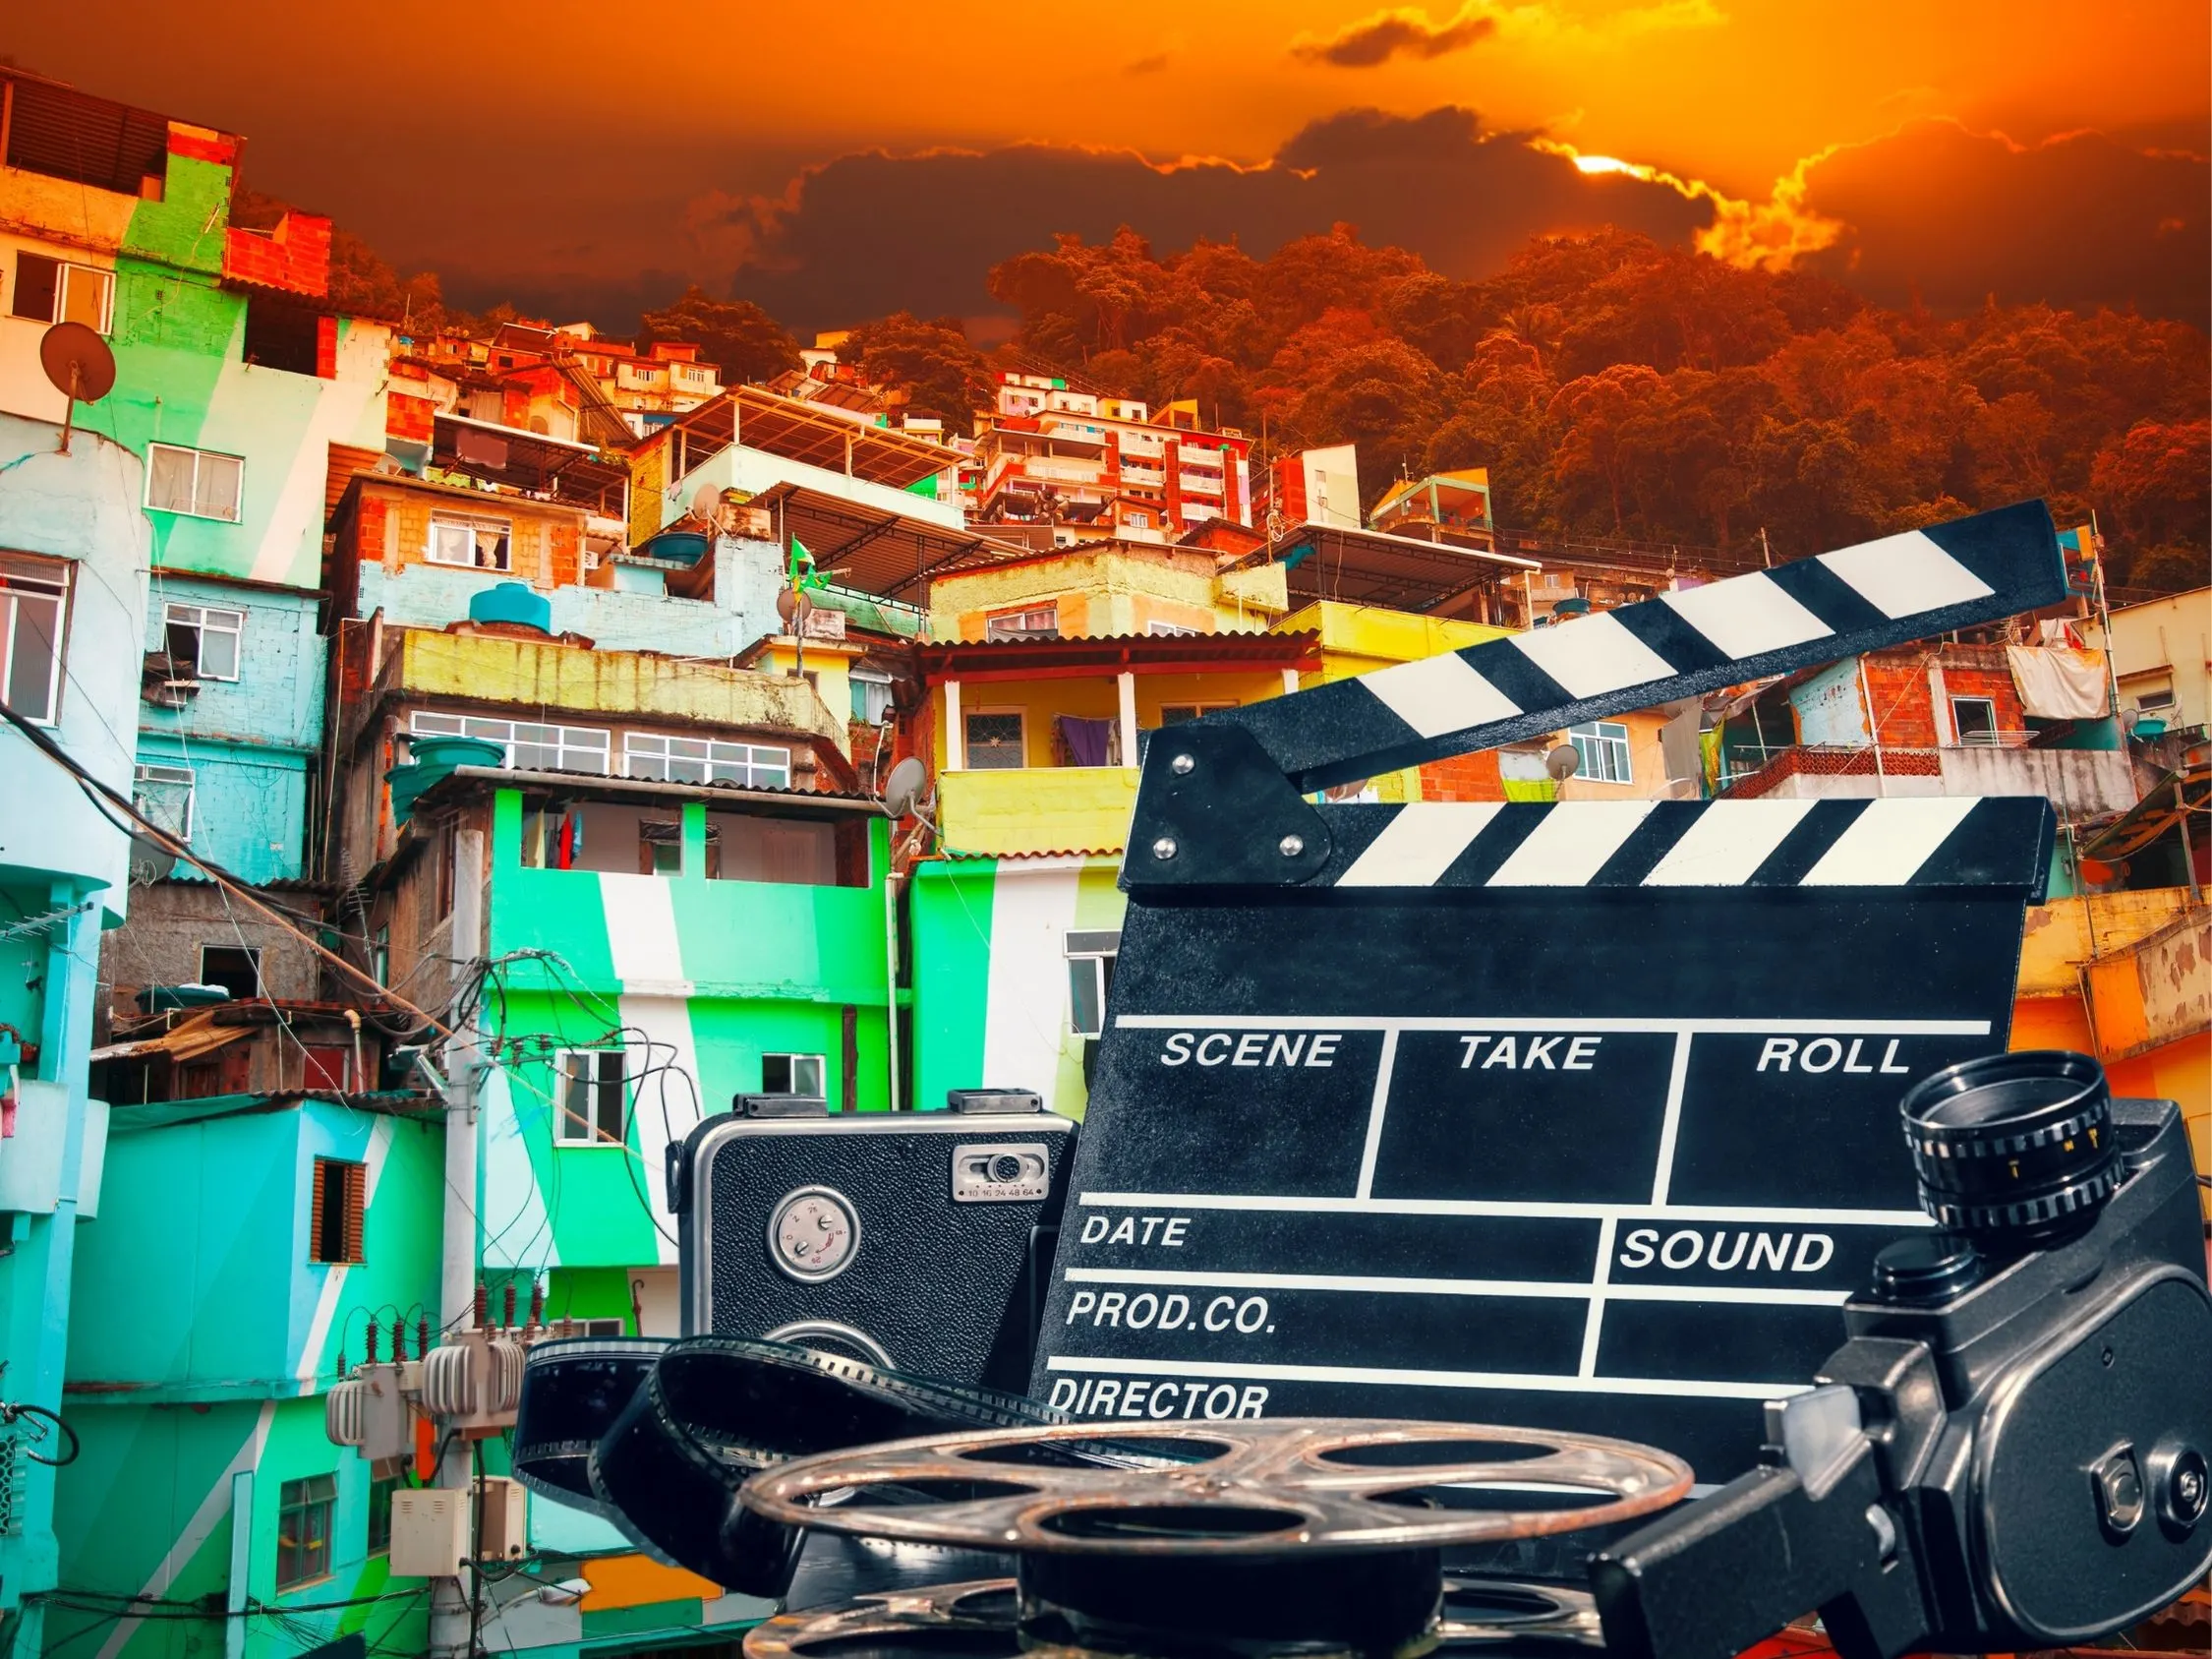 10 Extraordinary Movies Set In Brazil That Will Inspire You To Visit!